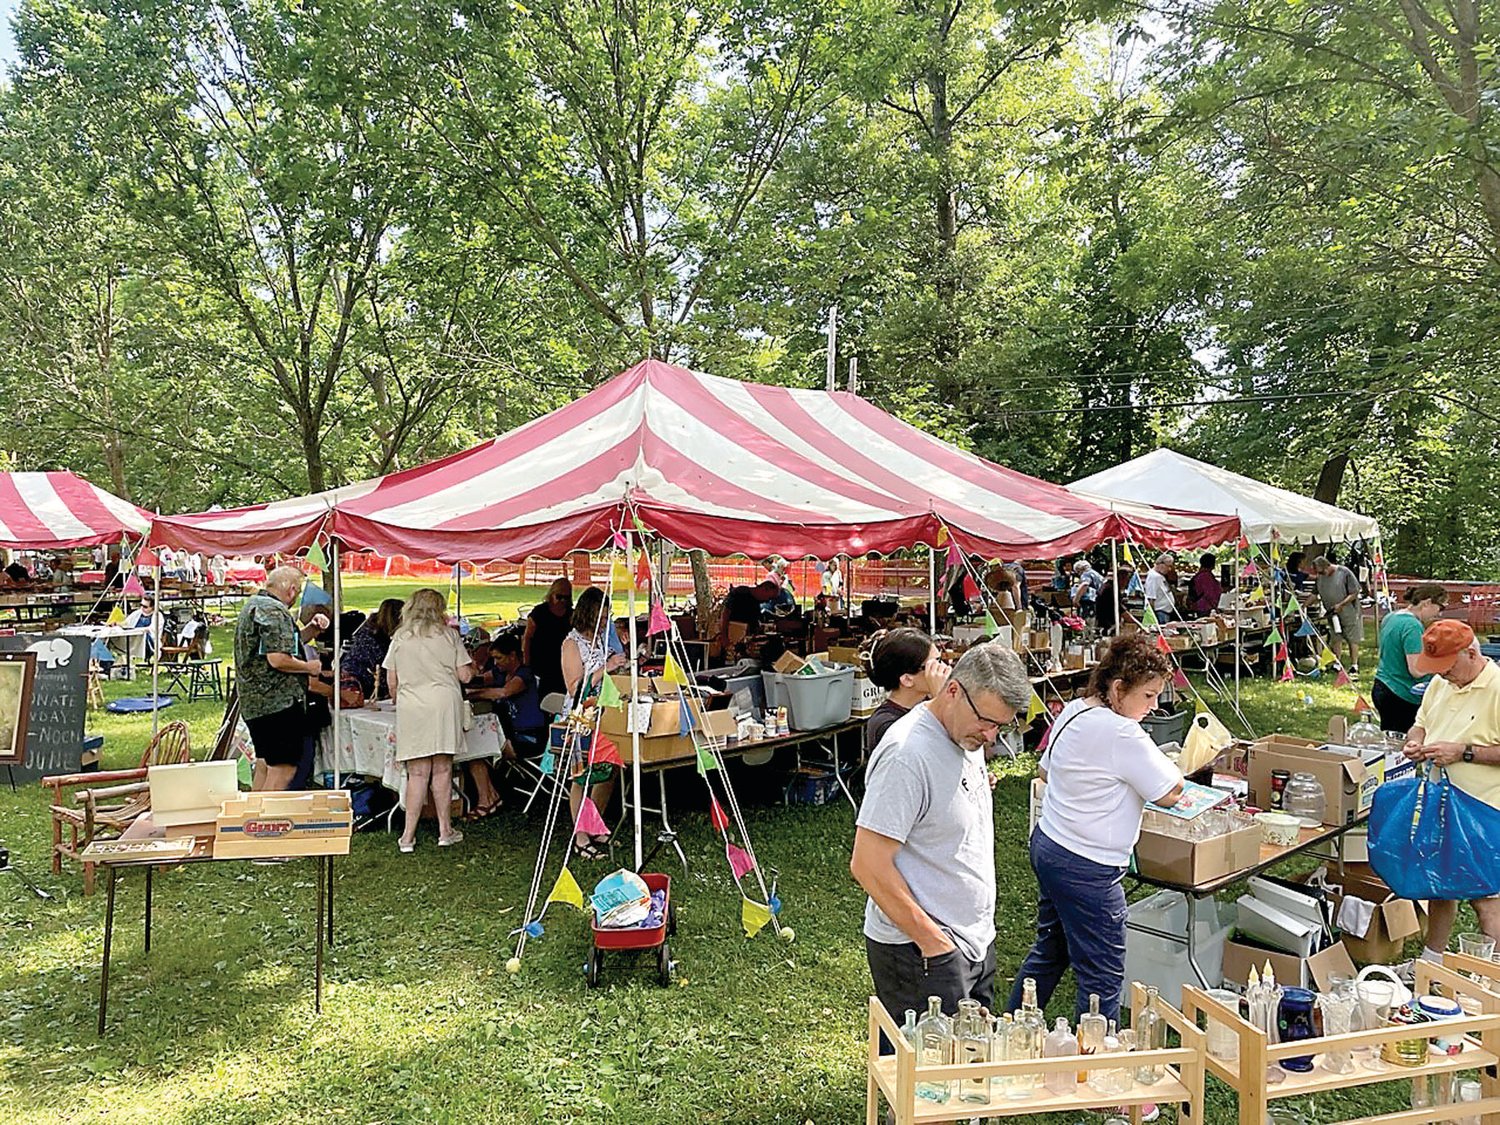 After a two-year hiatus, the Tinicum Arts Festival, presented by the Tinicum Civic Association, returns with record attendance and robust vendor sales. Here, shoppers browse the white elephant tent sale.